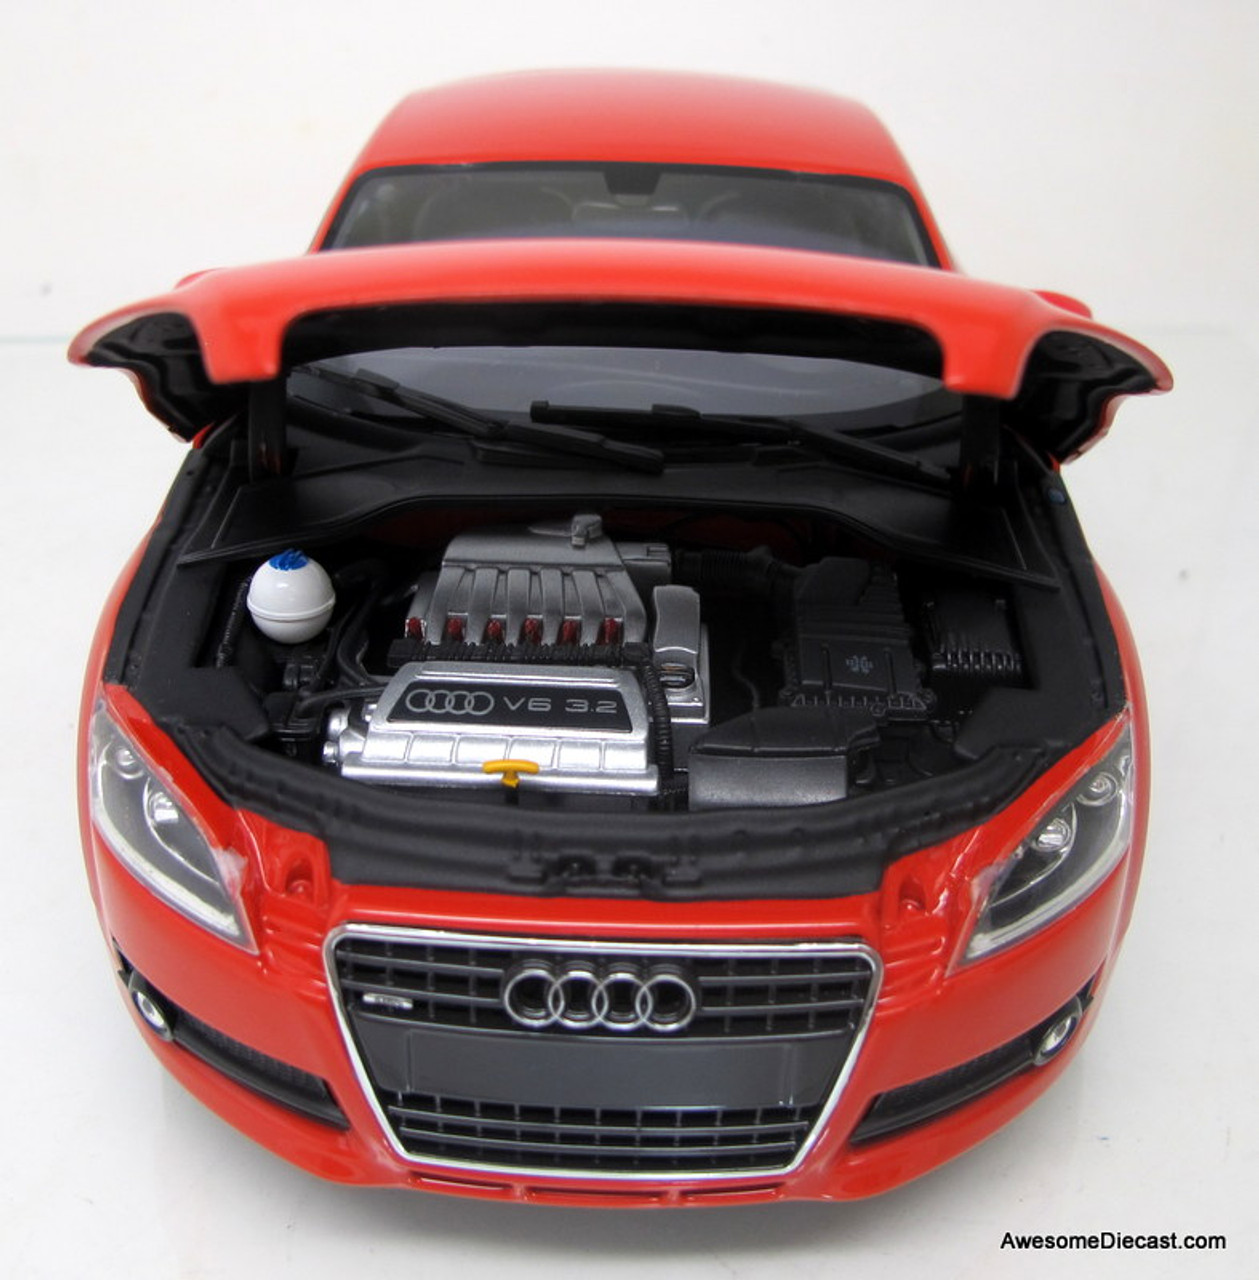 Minichamps 1:18 2006 Audi TT Roadster (red) - Awesome Diecast